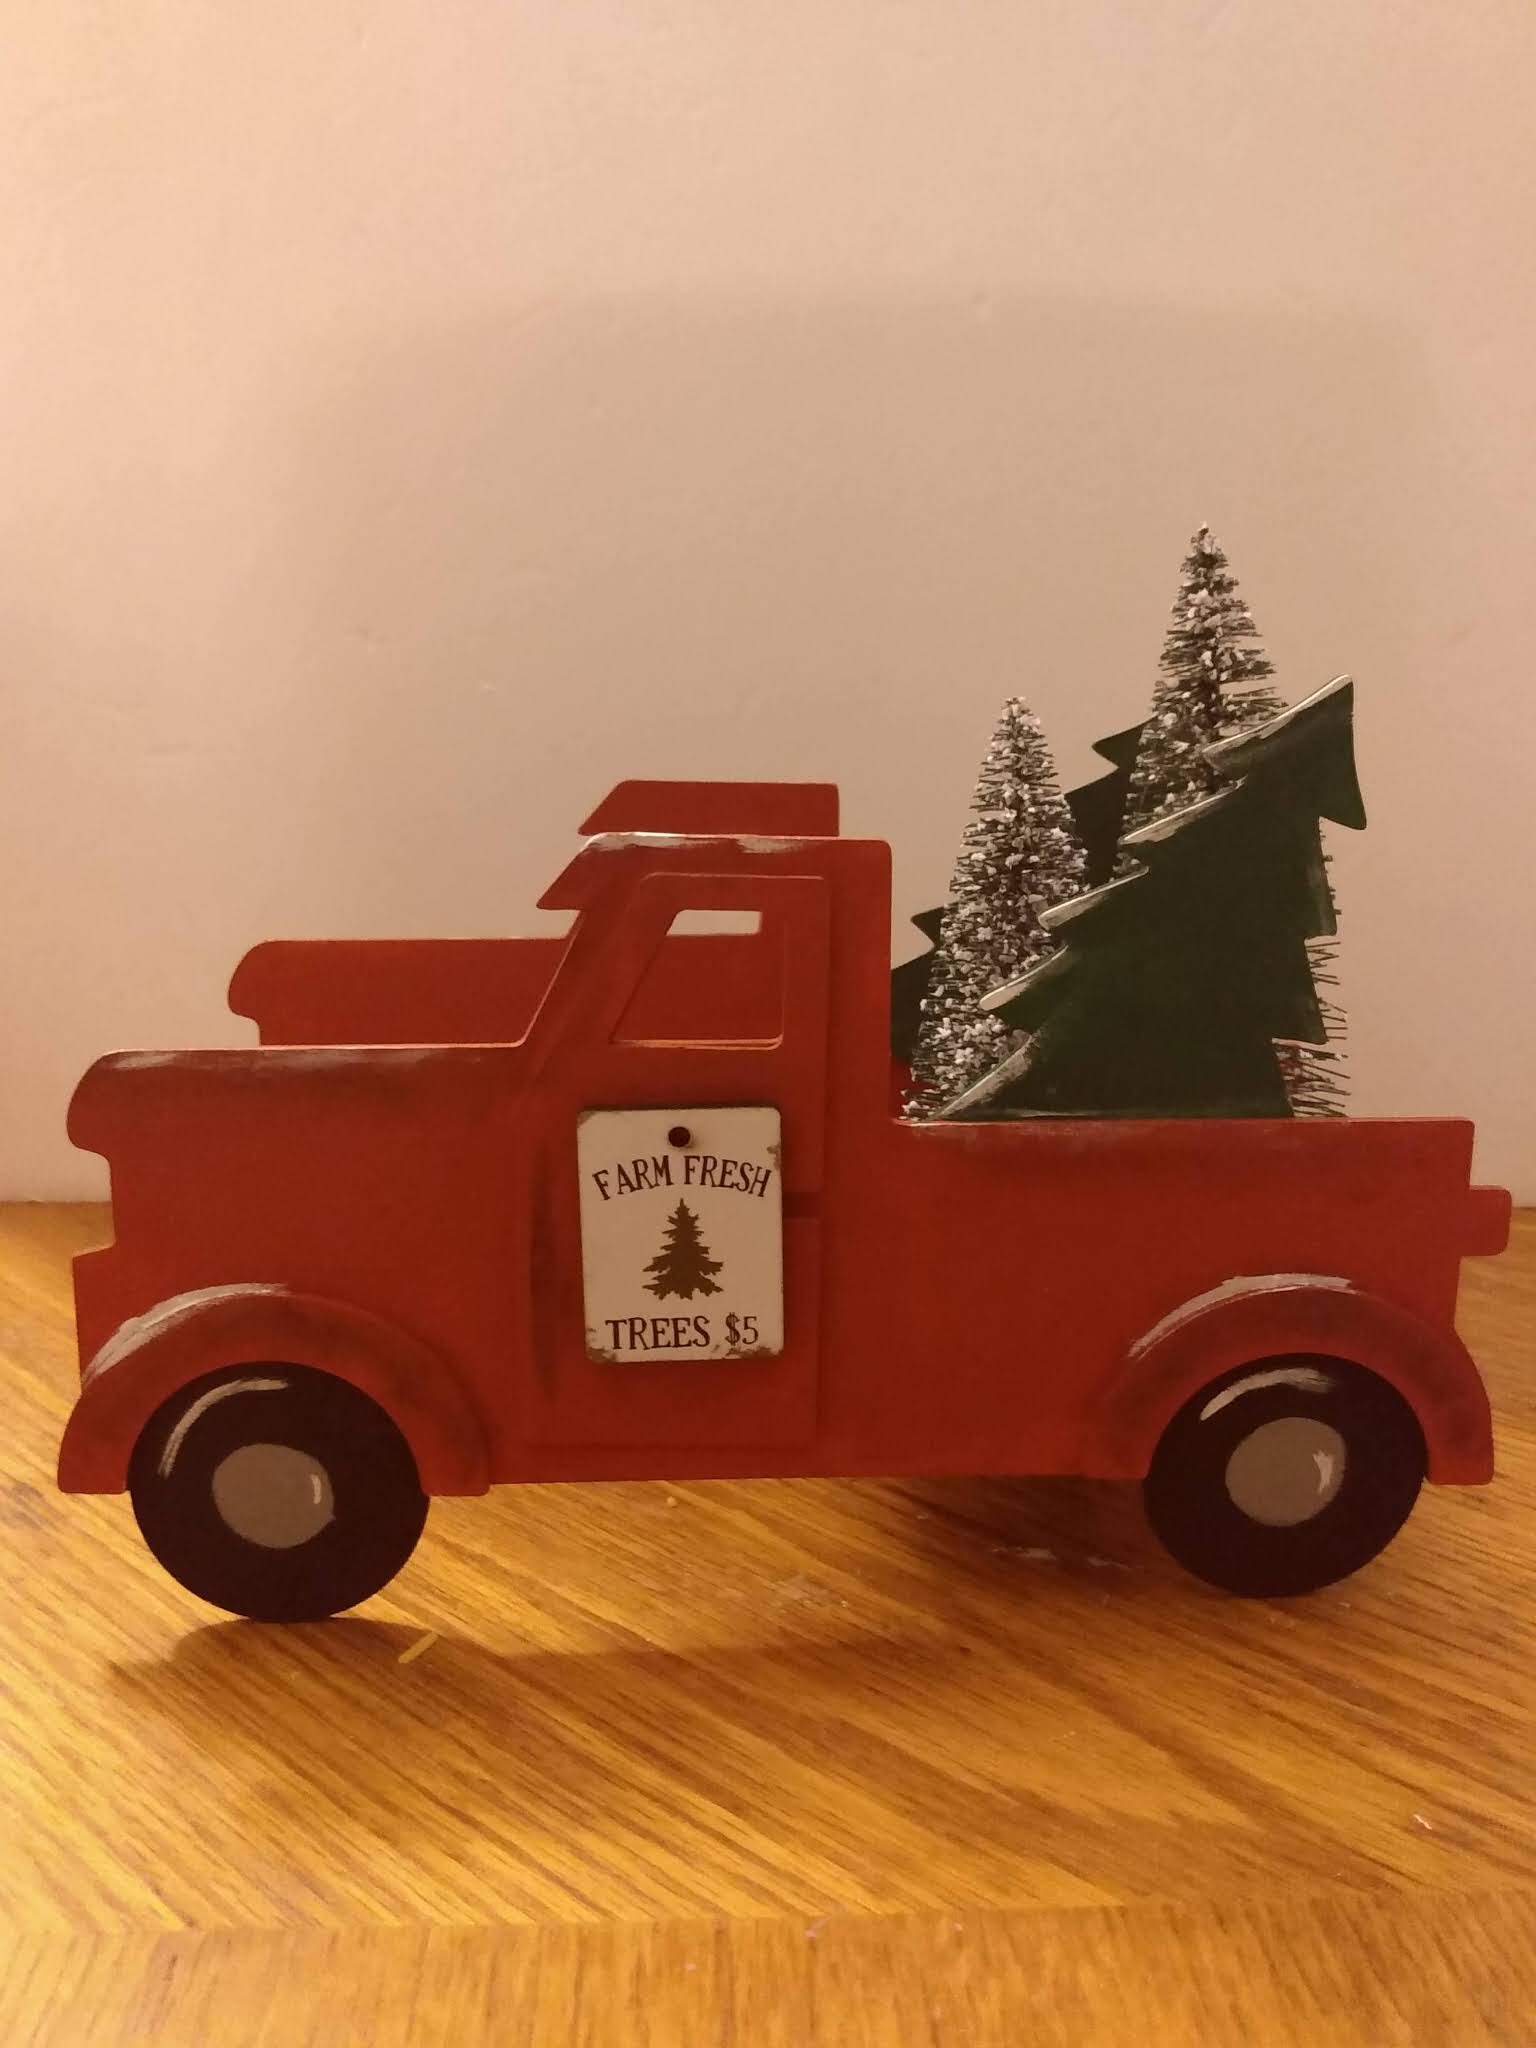 Pams Party & Practical Tips: Red Truck Christmas Crafts